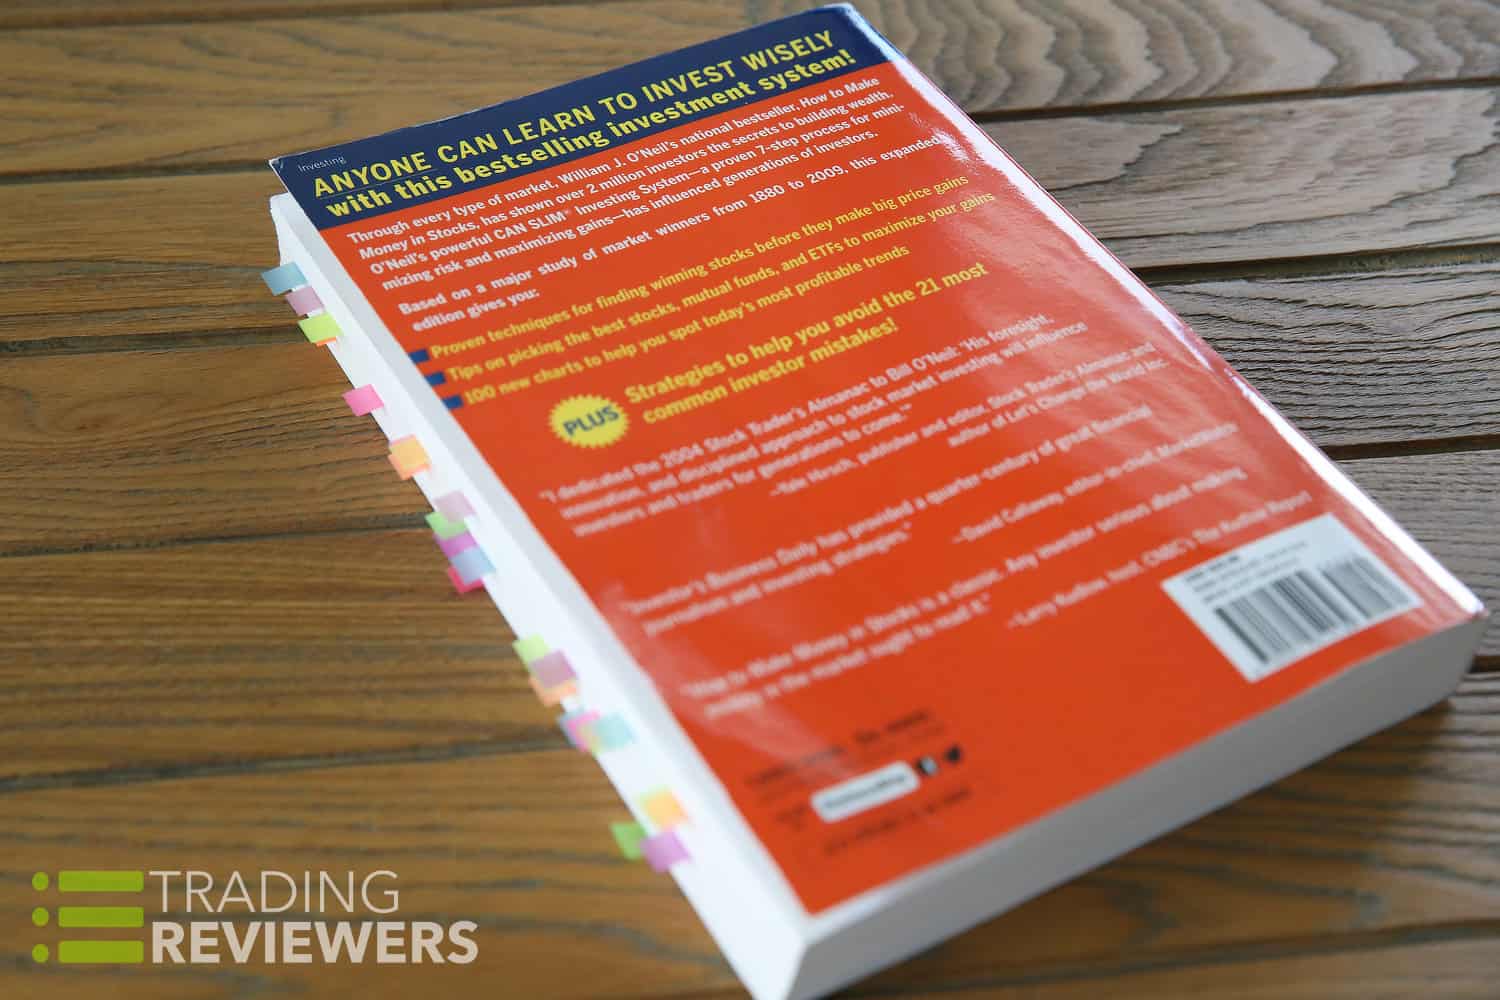 best book for new investing in stocks - Money|Stocks|Stock|System|Book|Market|Trading|Books|Guide|Times|Day|Der|Download|Investors|Edition|Investor|Description|Pdf|Format|Epub|O'neil|Die|Strategies|Strategy|Mit|Investing|Dummies|Risk|Gains|Business|Man|Investment|Years|World|Wie|Action|Charts|William|Dad|Plan|Good Times|Stock Market|Ultimate Guide|Mobi Format|Full Book|Day Trading|National Bestseller|Successful Investing|Rich Dad|Seven-Step Process|Maximizing Gains|Major Study|American Association|Individual Investors|Mutual Funds|Book Description|Download Book Description|Handbuch Des|Stock Market Winners|12-Year Study|Leading Investment Strategies|Top-Performing Strategy|System-You Get|Easy Steps|Daily Resource|Big Winners|Market Rally|Big Losses|Market Downturn|Canslim Method